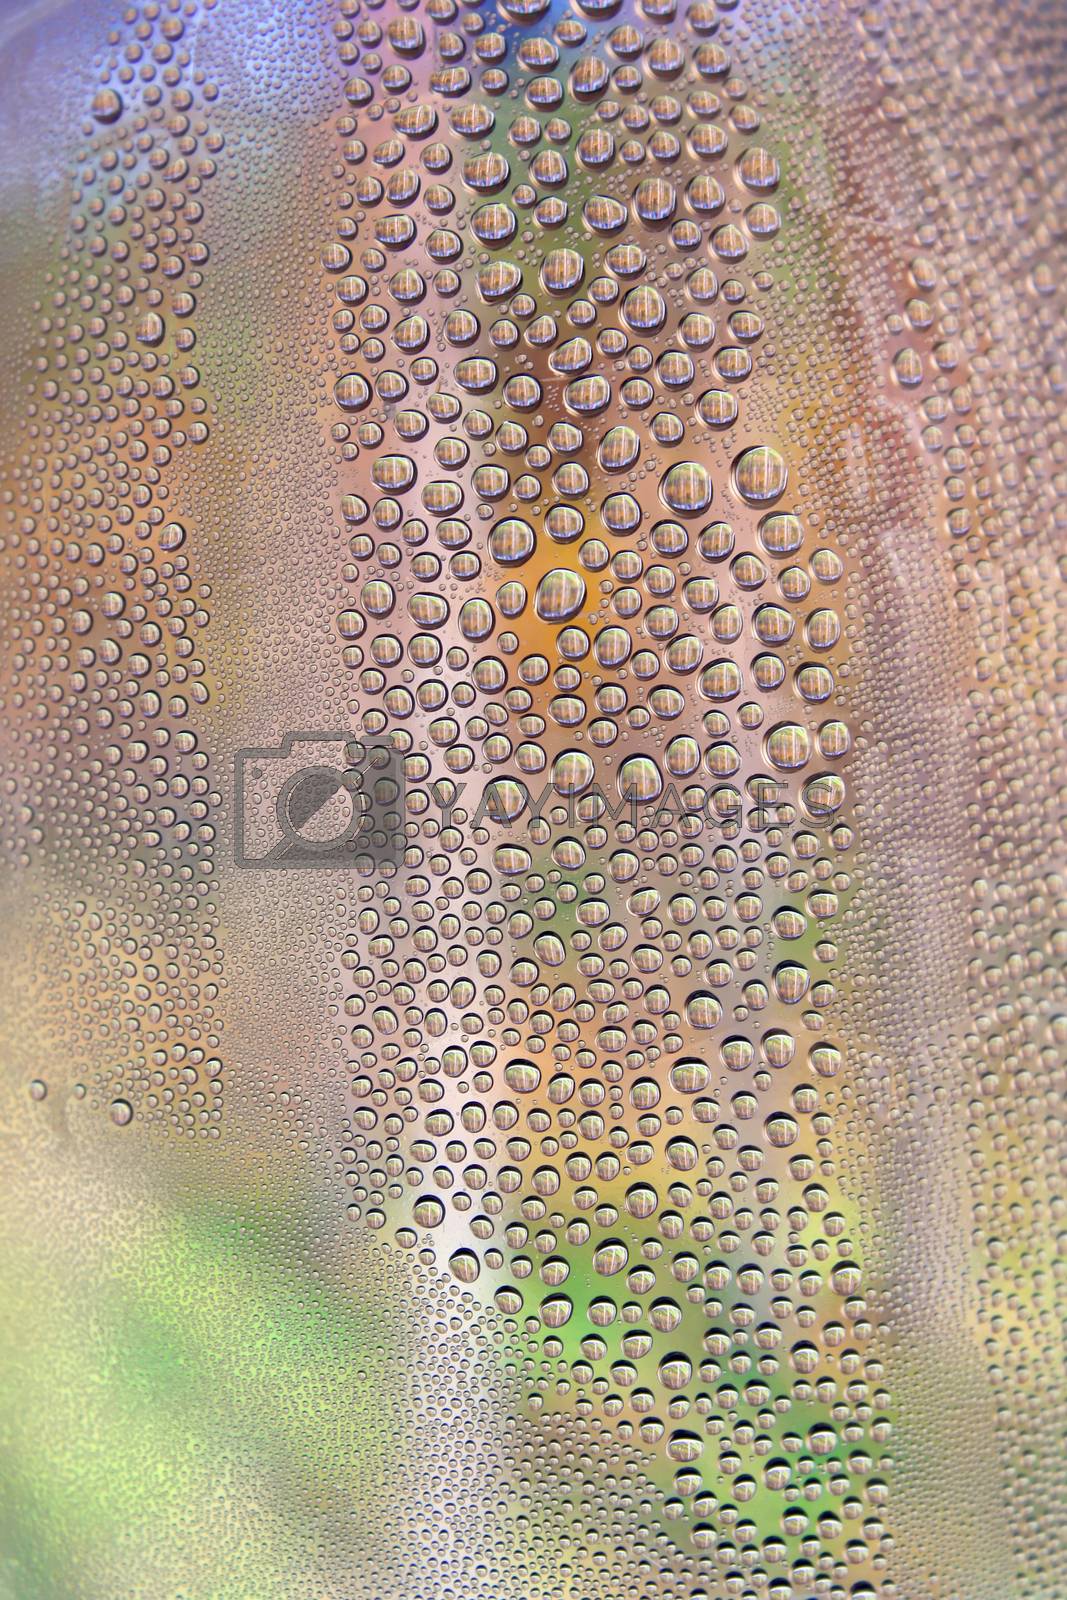 Royalty free image of Drops of water on the glass by sergpet